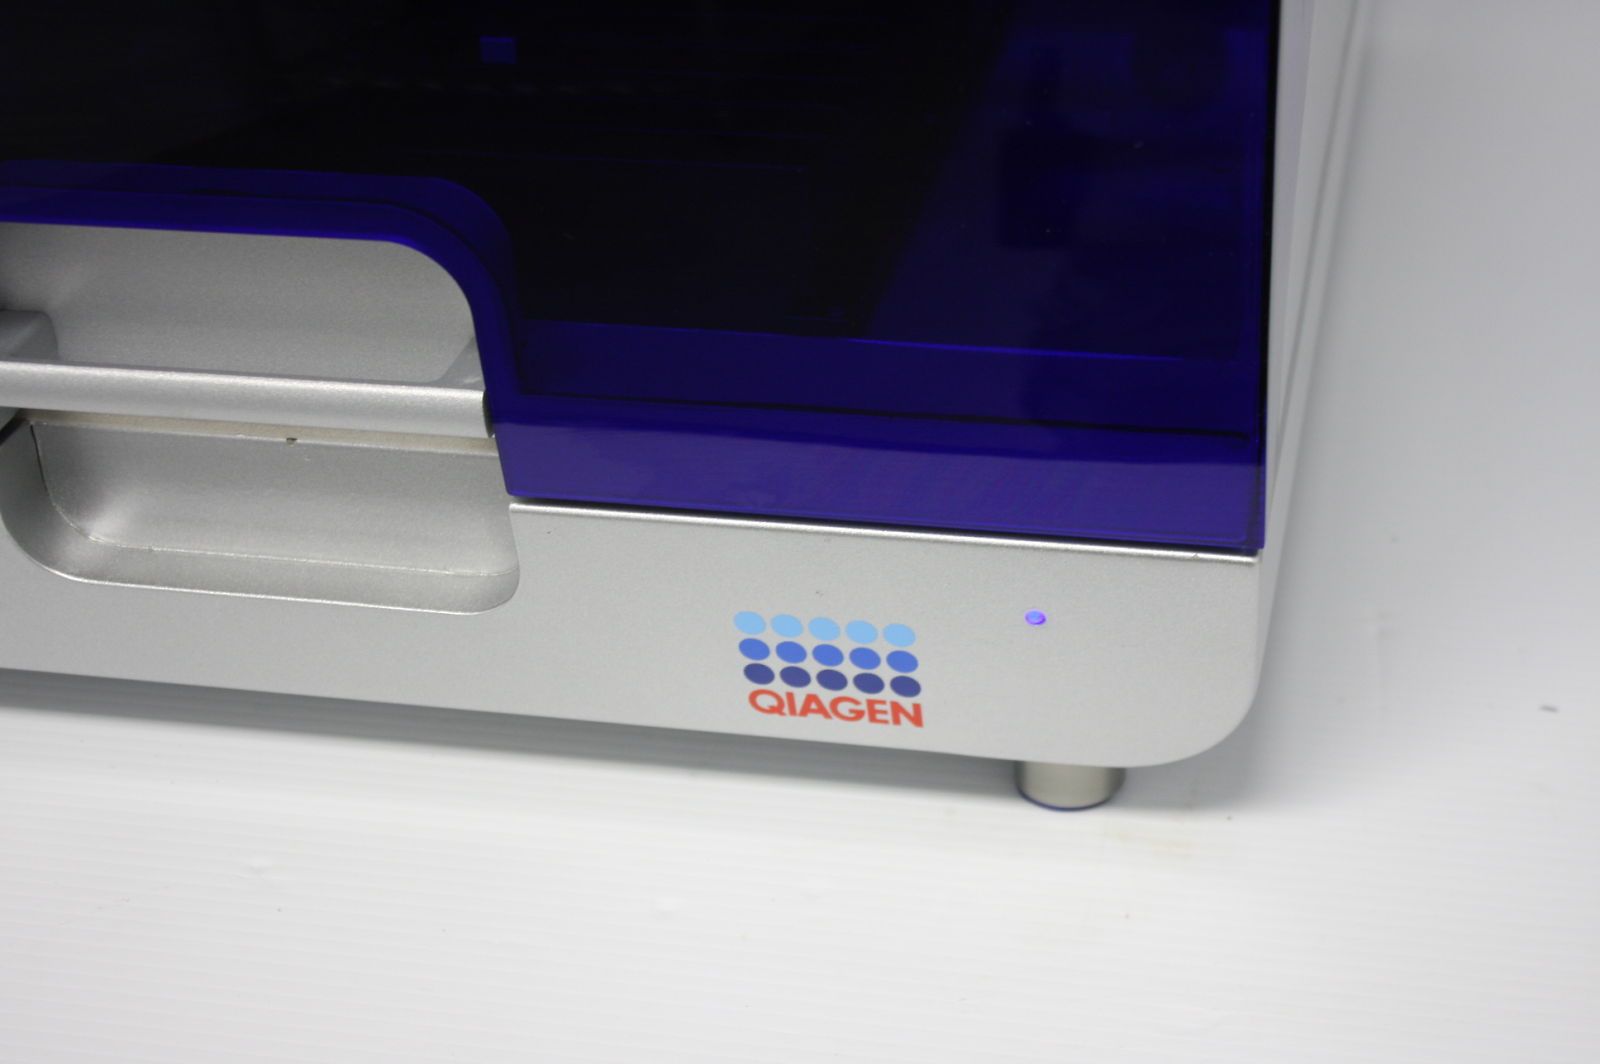 automated pcr systems